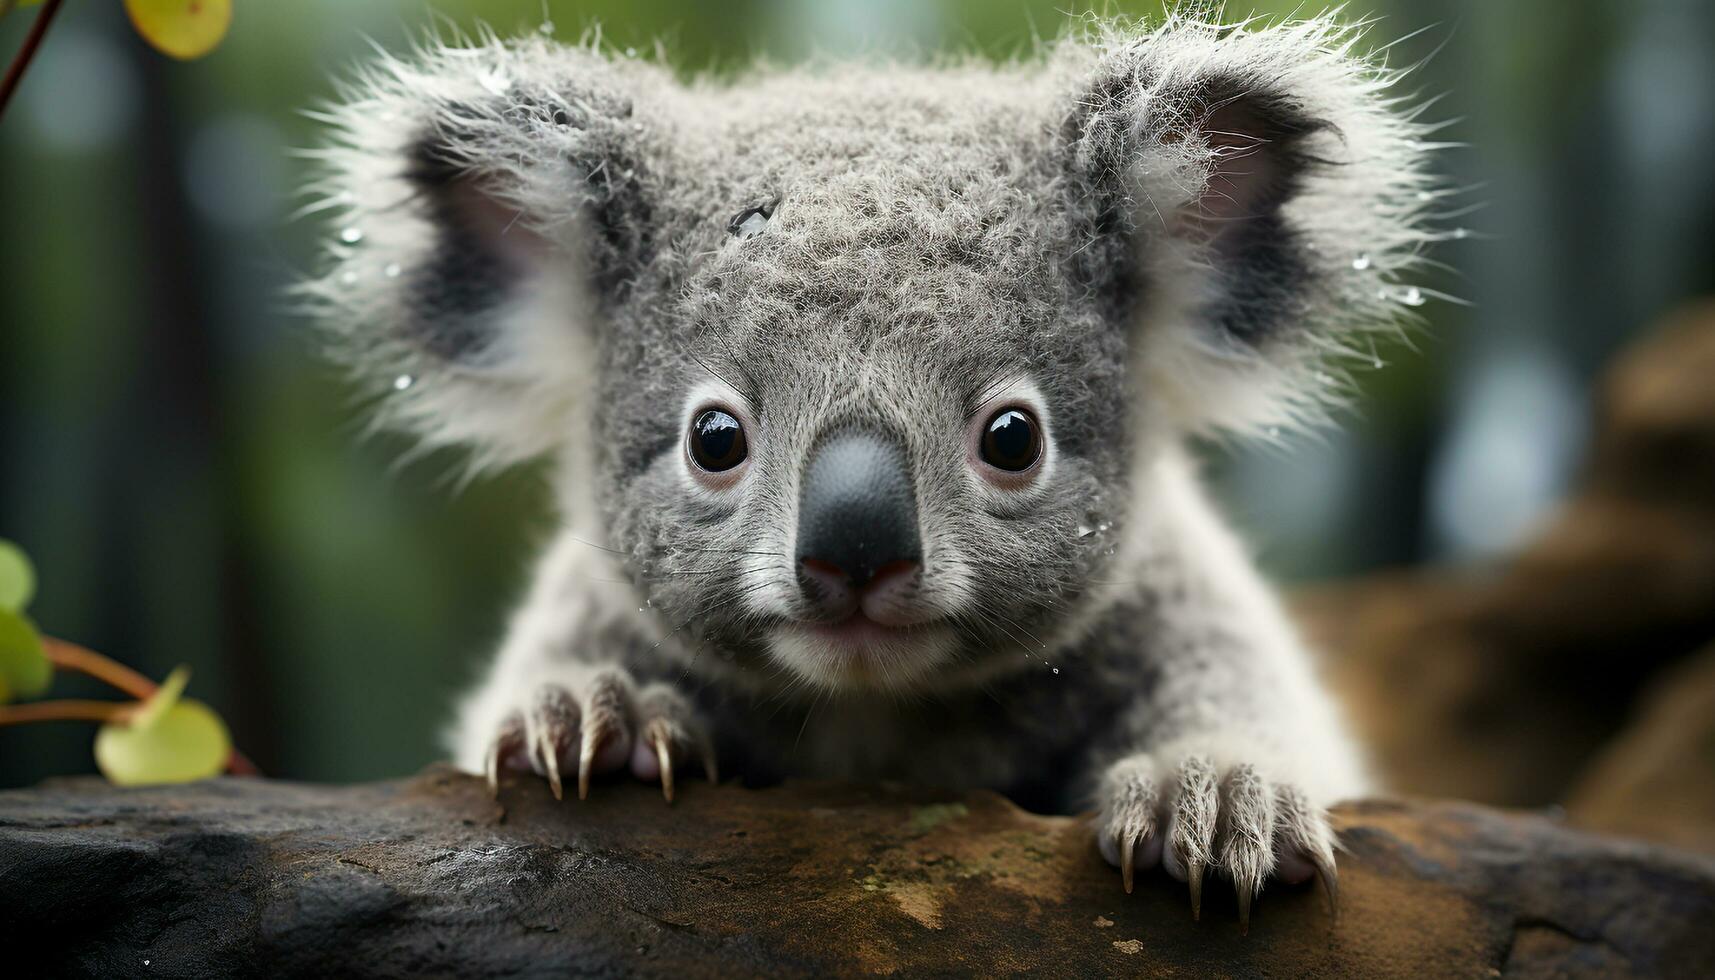 Cute koala, marsupial, endangered species, furry, looking at camera  generated by AI 29764732 Stock Photo at Vecteezy